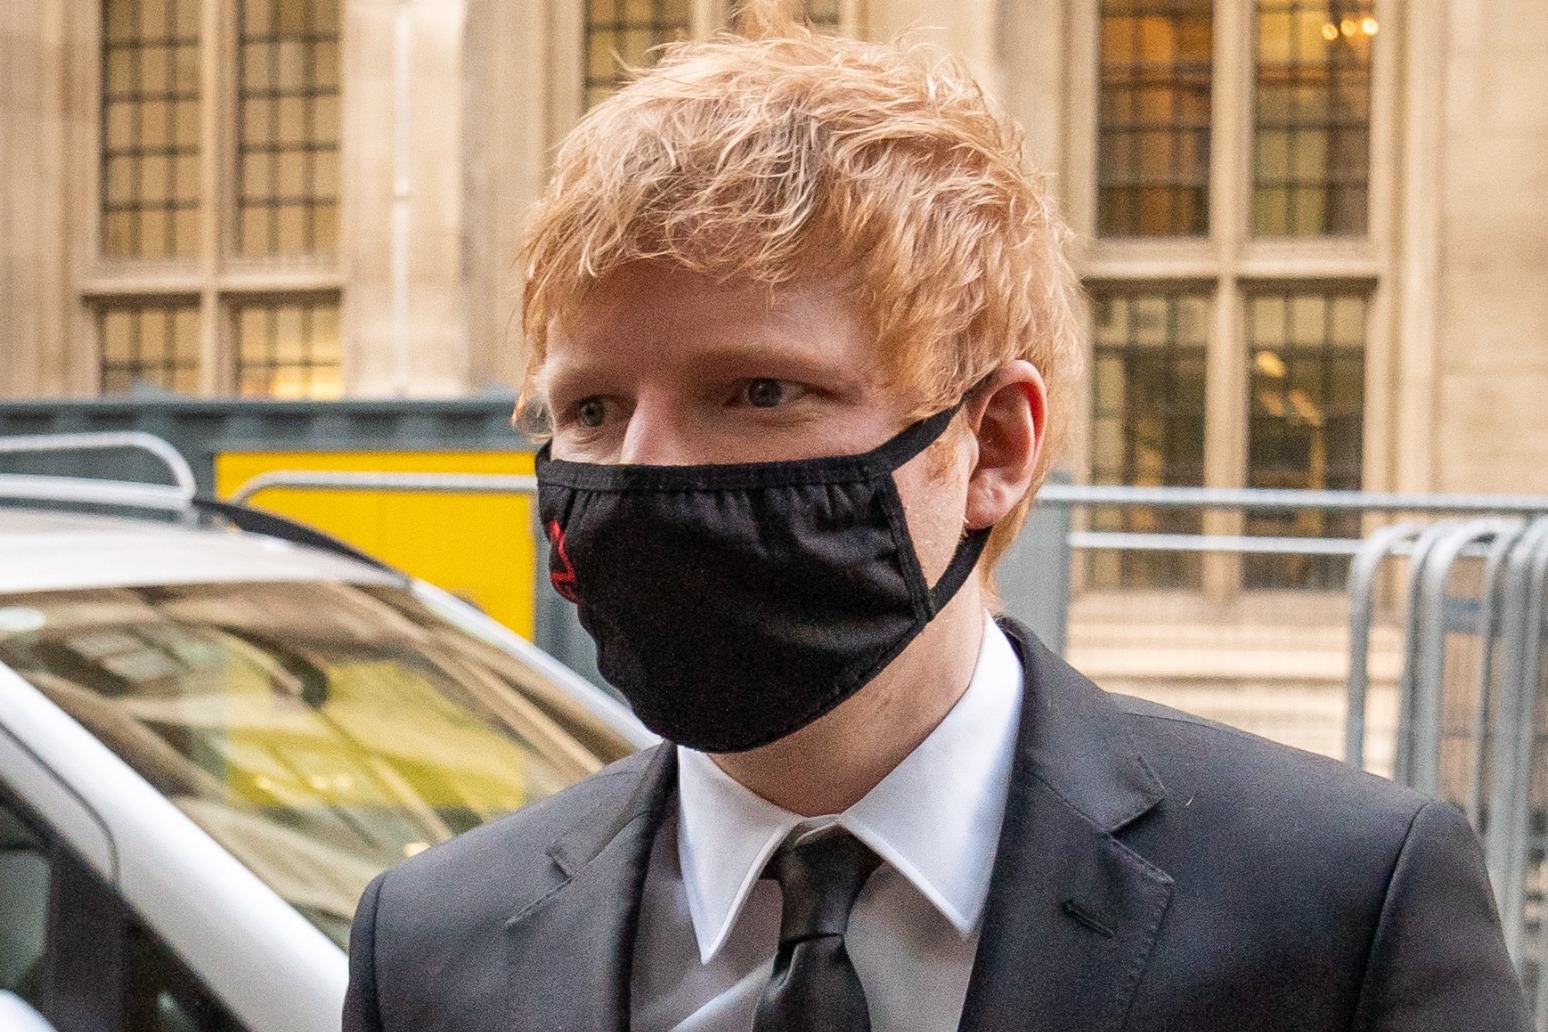 Ed Sheeran denies he borrows ideas from unknown songwriters in copyright trial